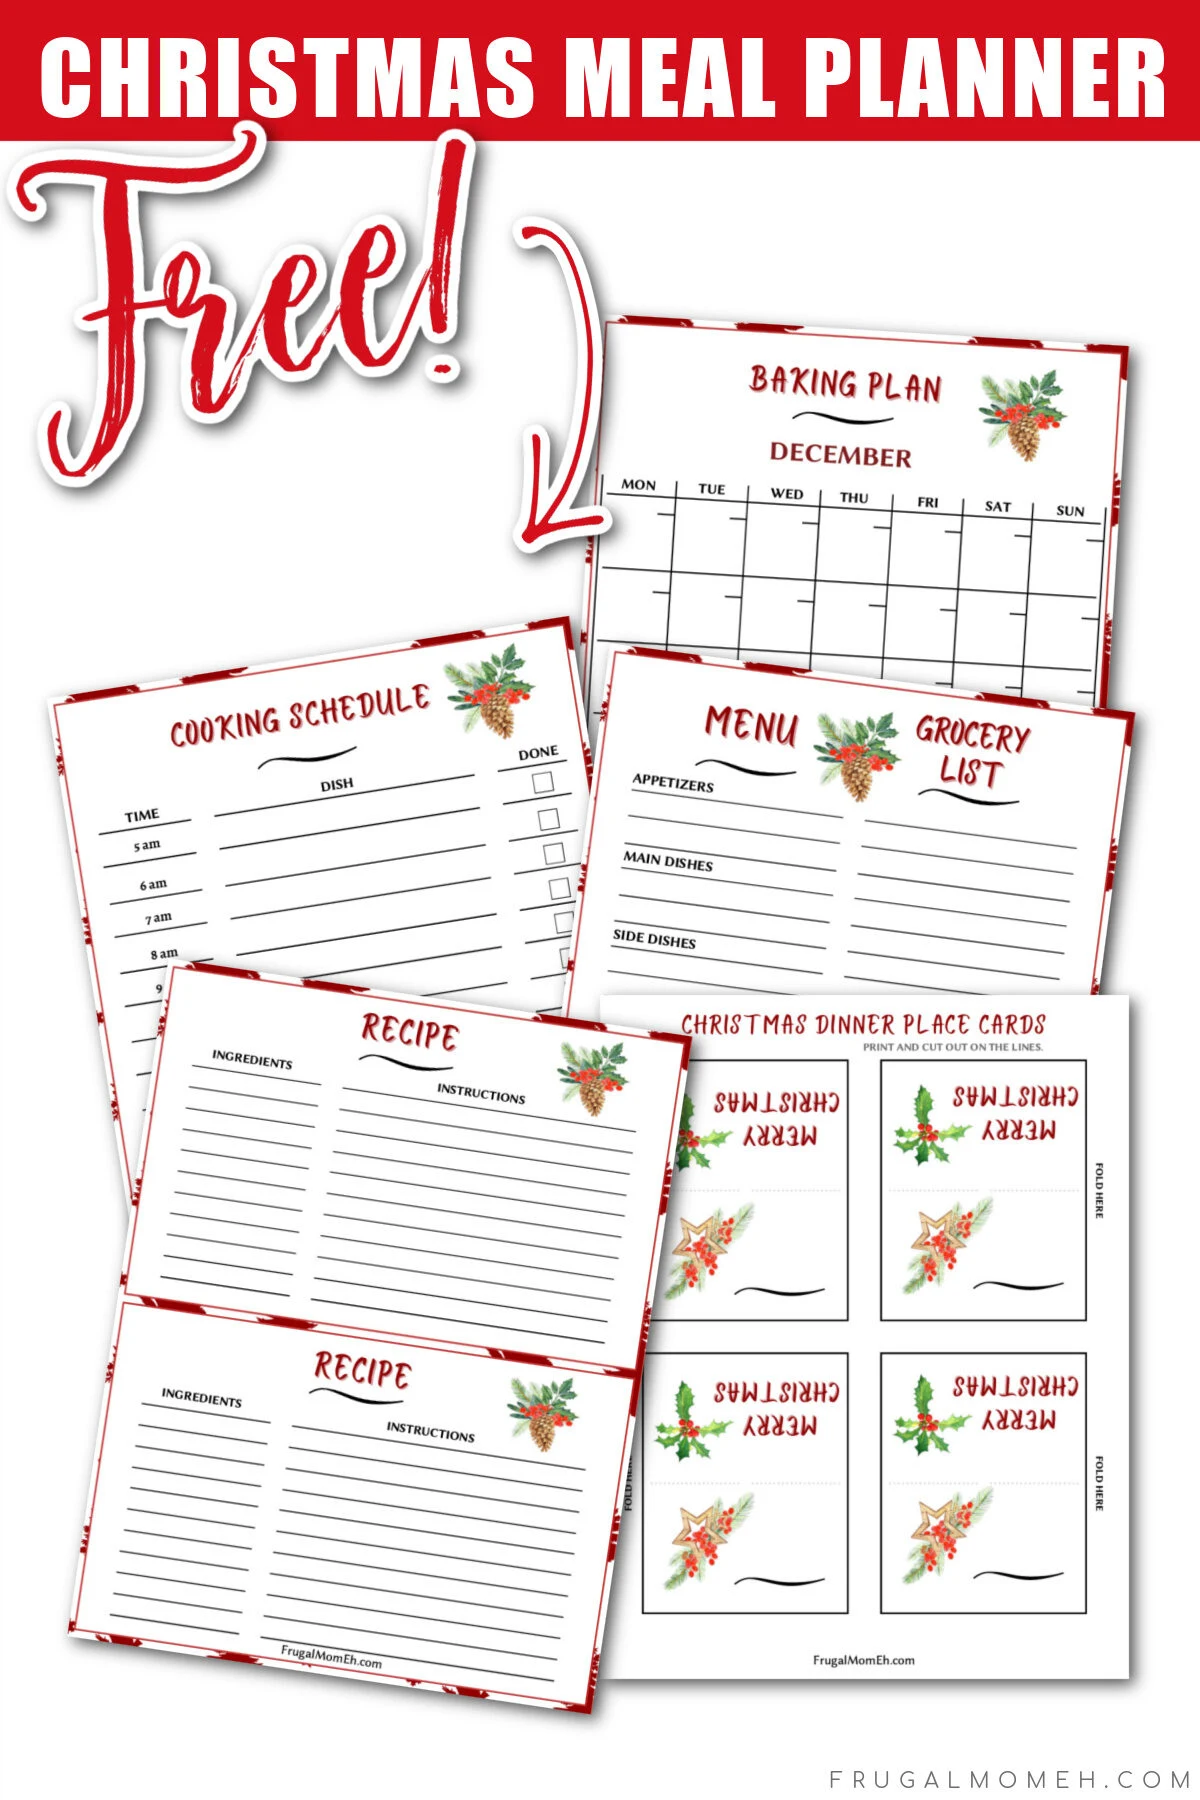 Free Printable Christmas meal planner that you can use to create your grocery list, write down recipes and plan a festive Christmas dinner!